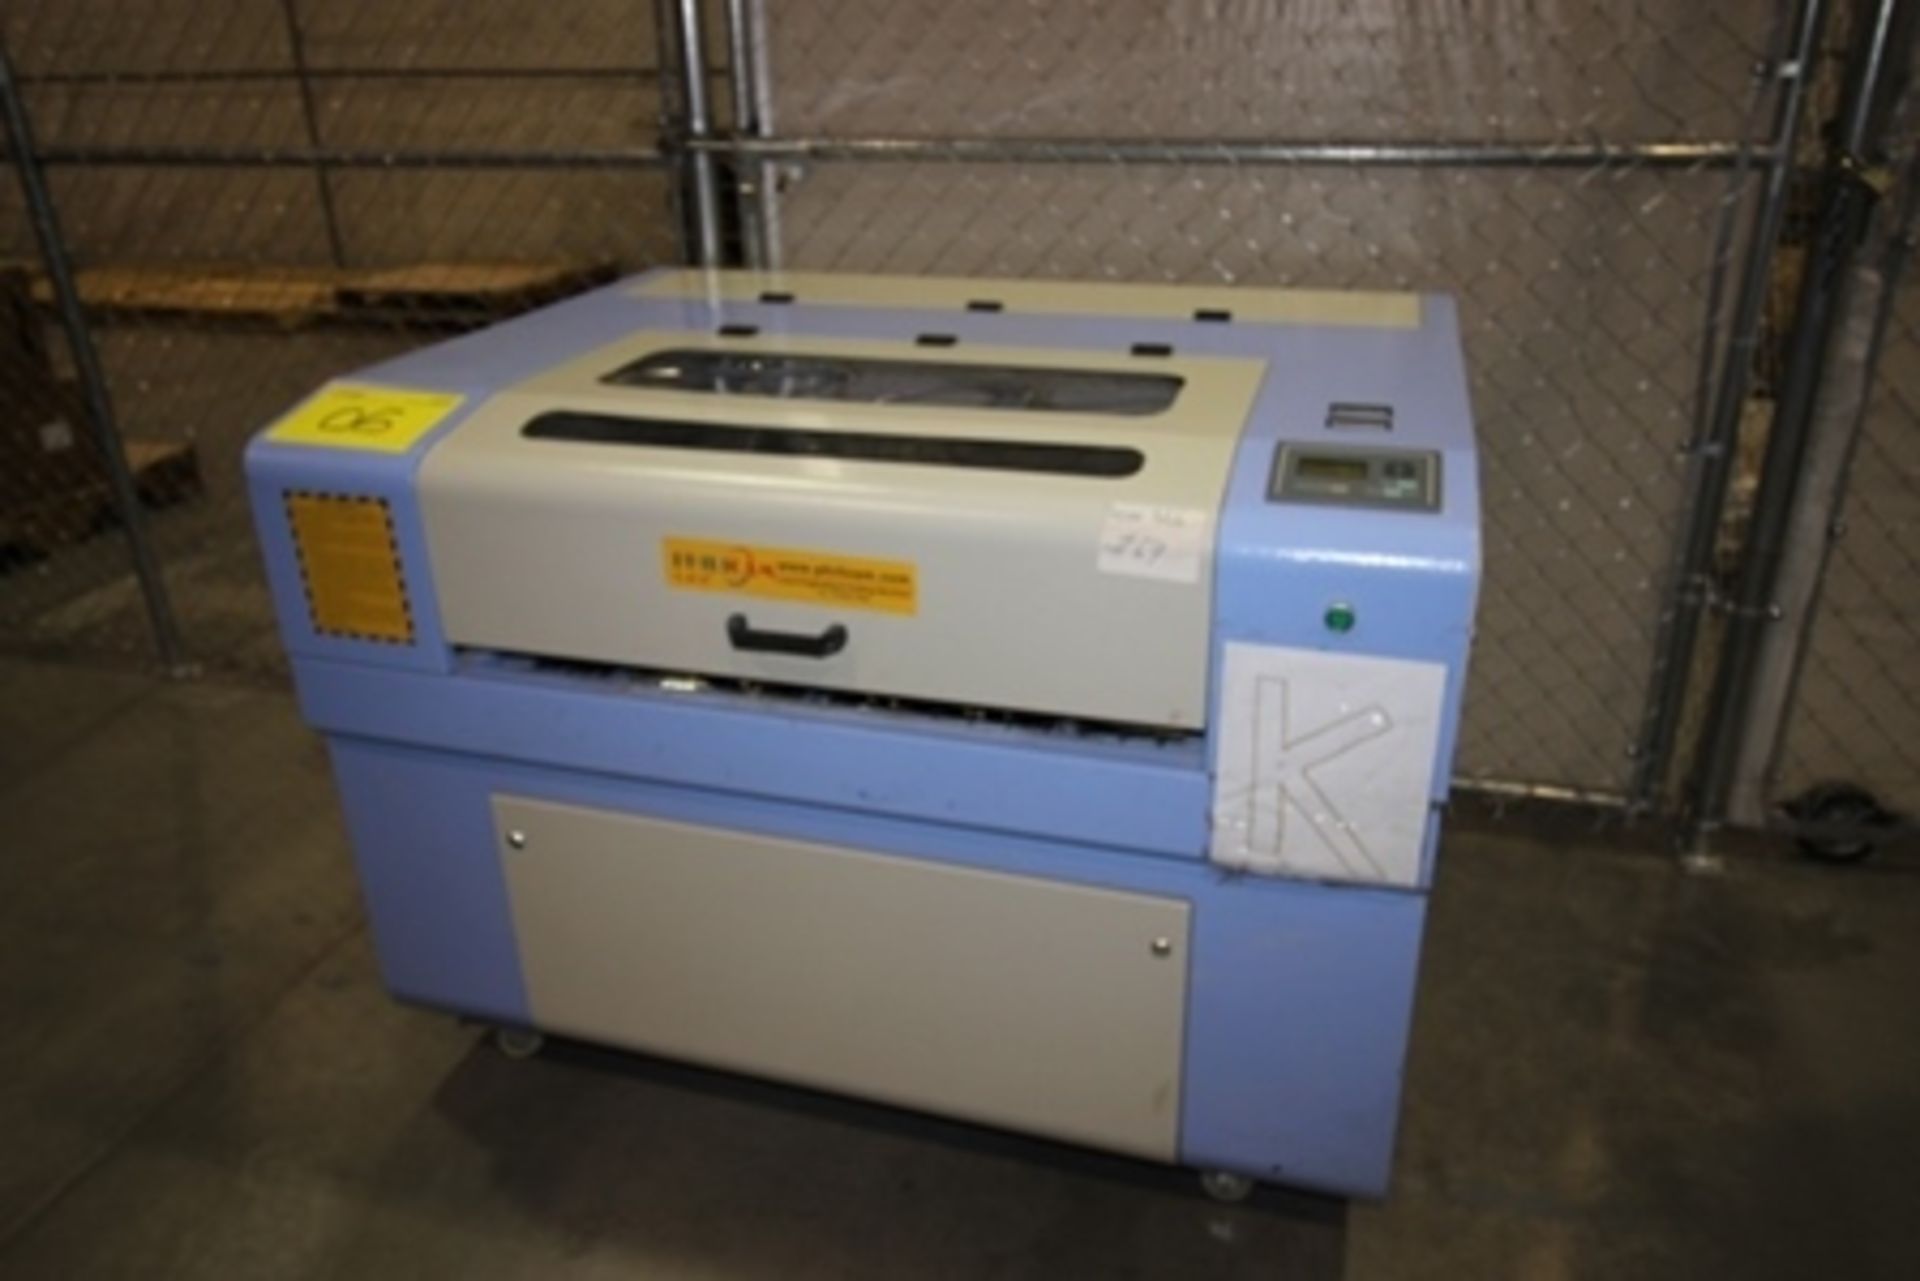 2017 Phillican CO2 laser engraver and cutting machine, model 6090. - Image 7 of 35